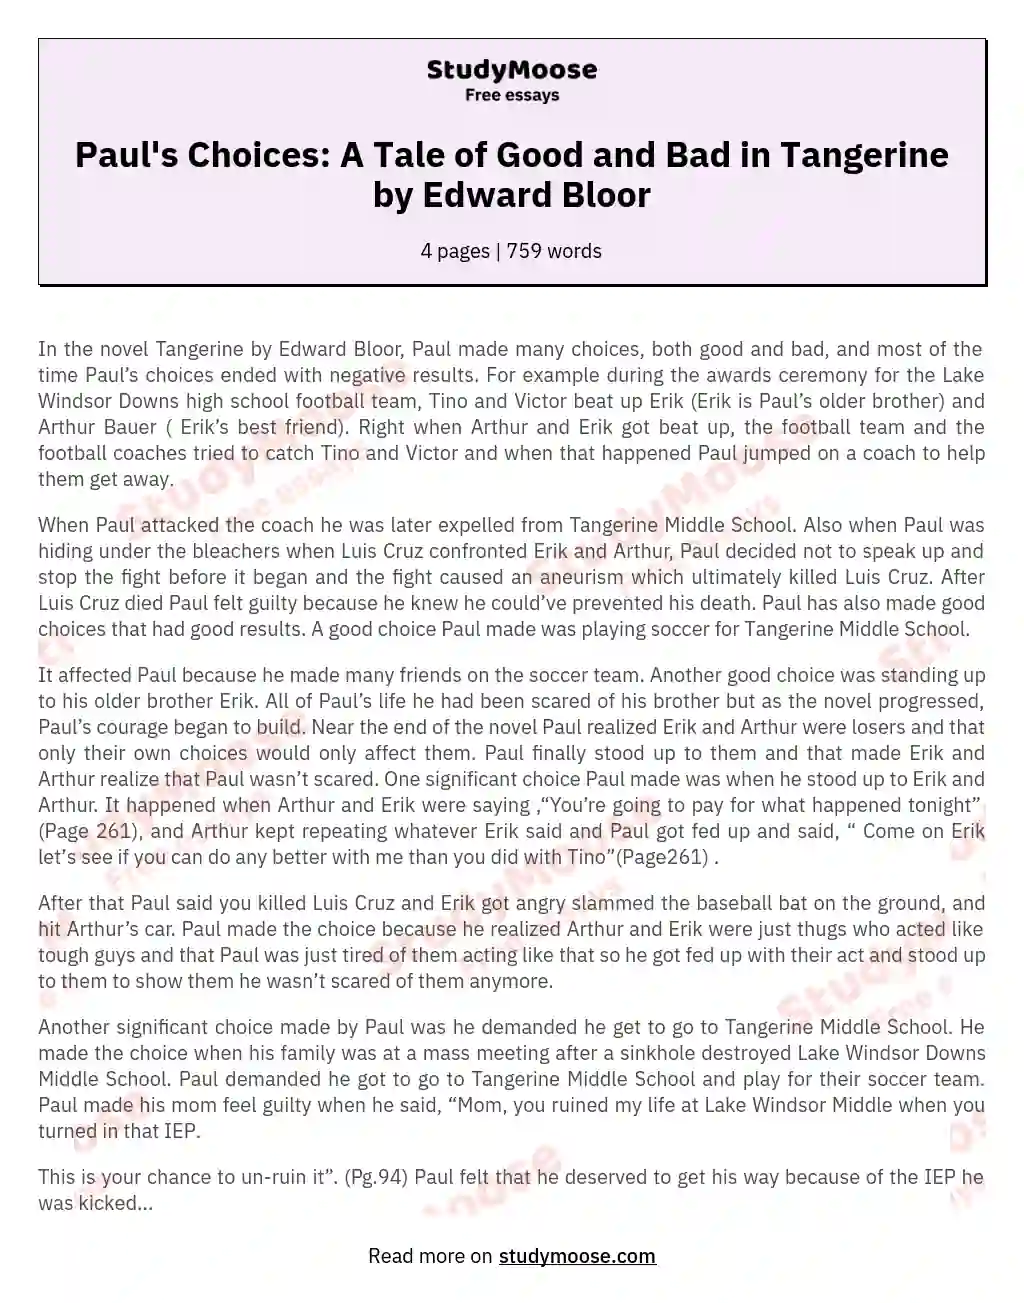 Paul's Choices: A Tale of Good and Bad in Tangerine by Edward Bloor essay